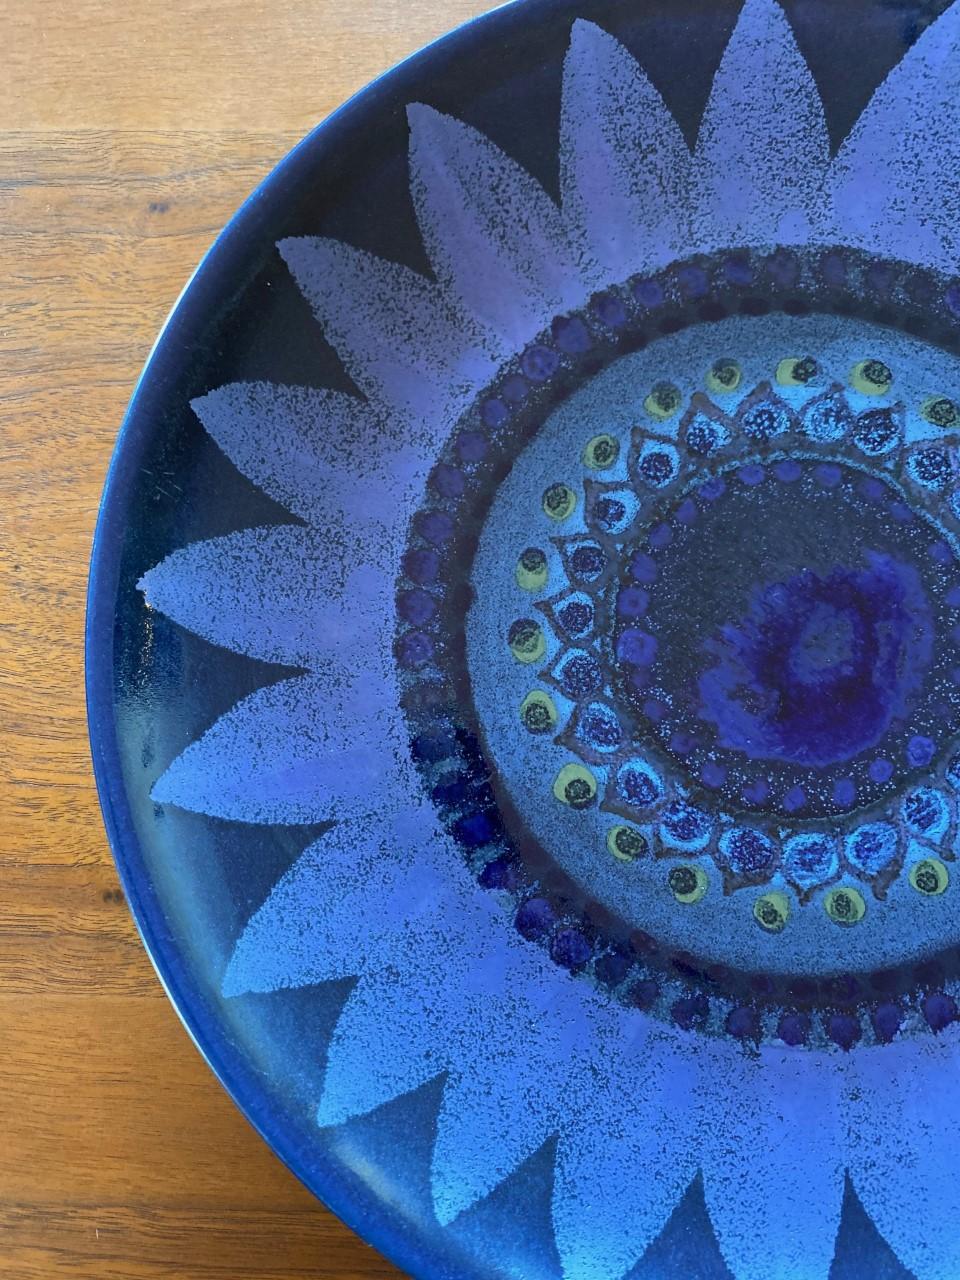 Beautiful vintage ceramic platter in a large modernist design by Hilkka-Liisa Ahola (1920-2009) for Arabia. The motif is floral with an array of shades in blue and indigo glaze. Incredible Mid Century signature addition to your style or décor. A